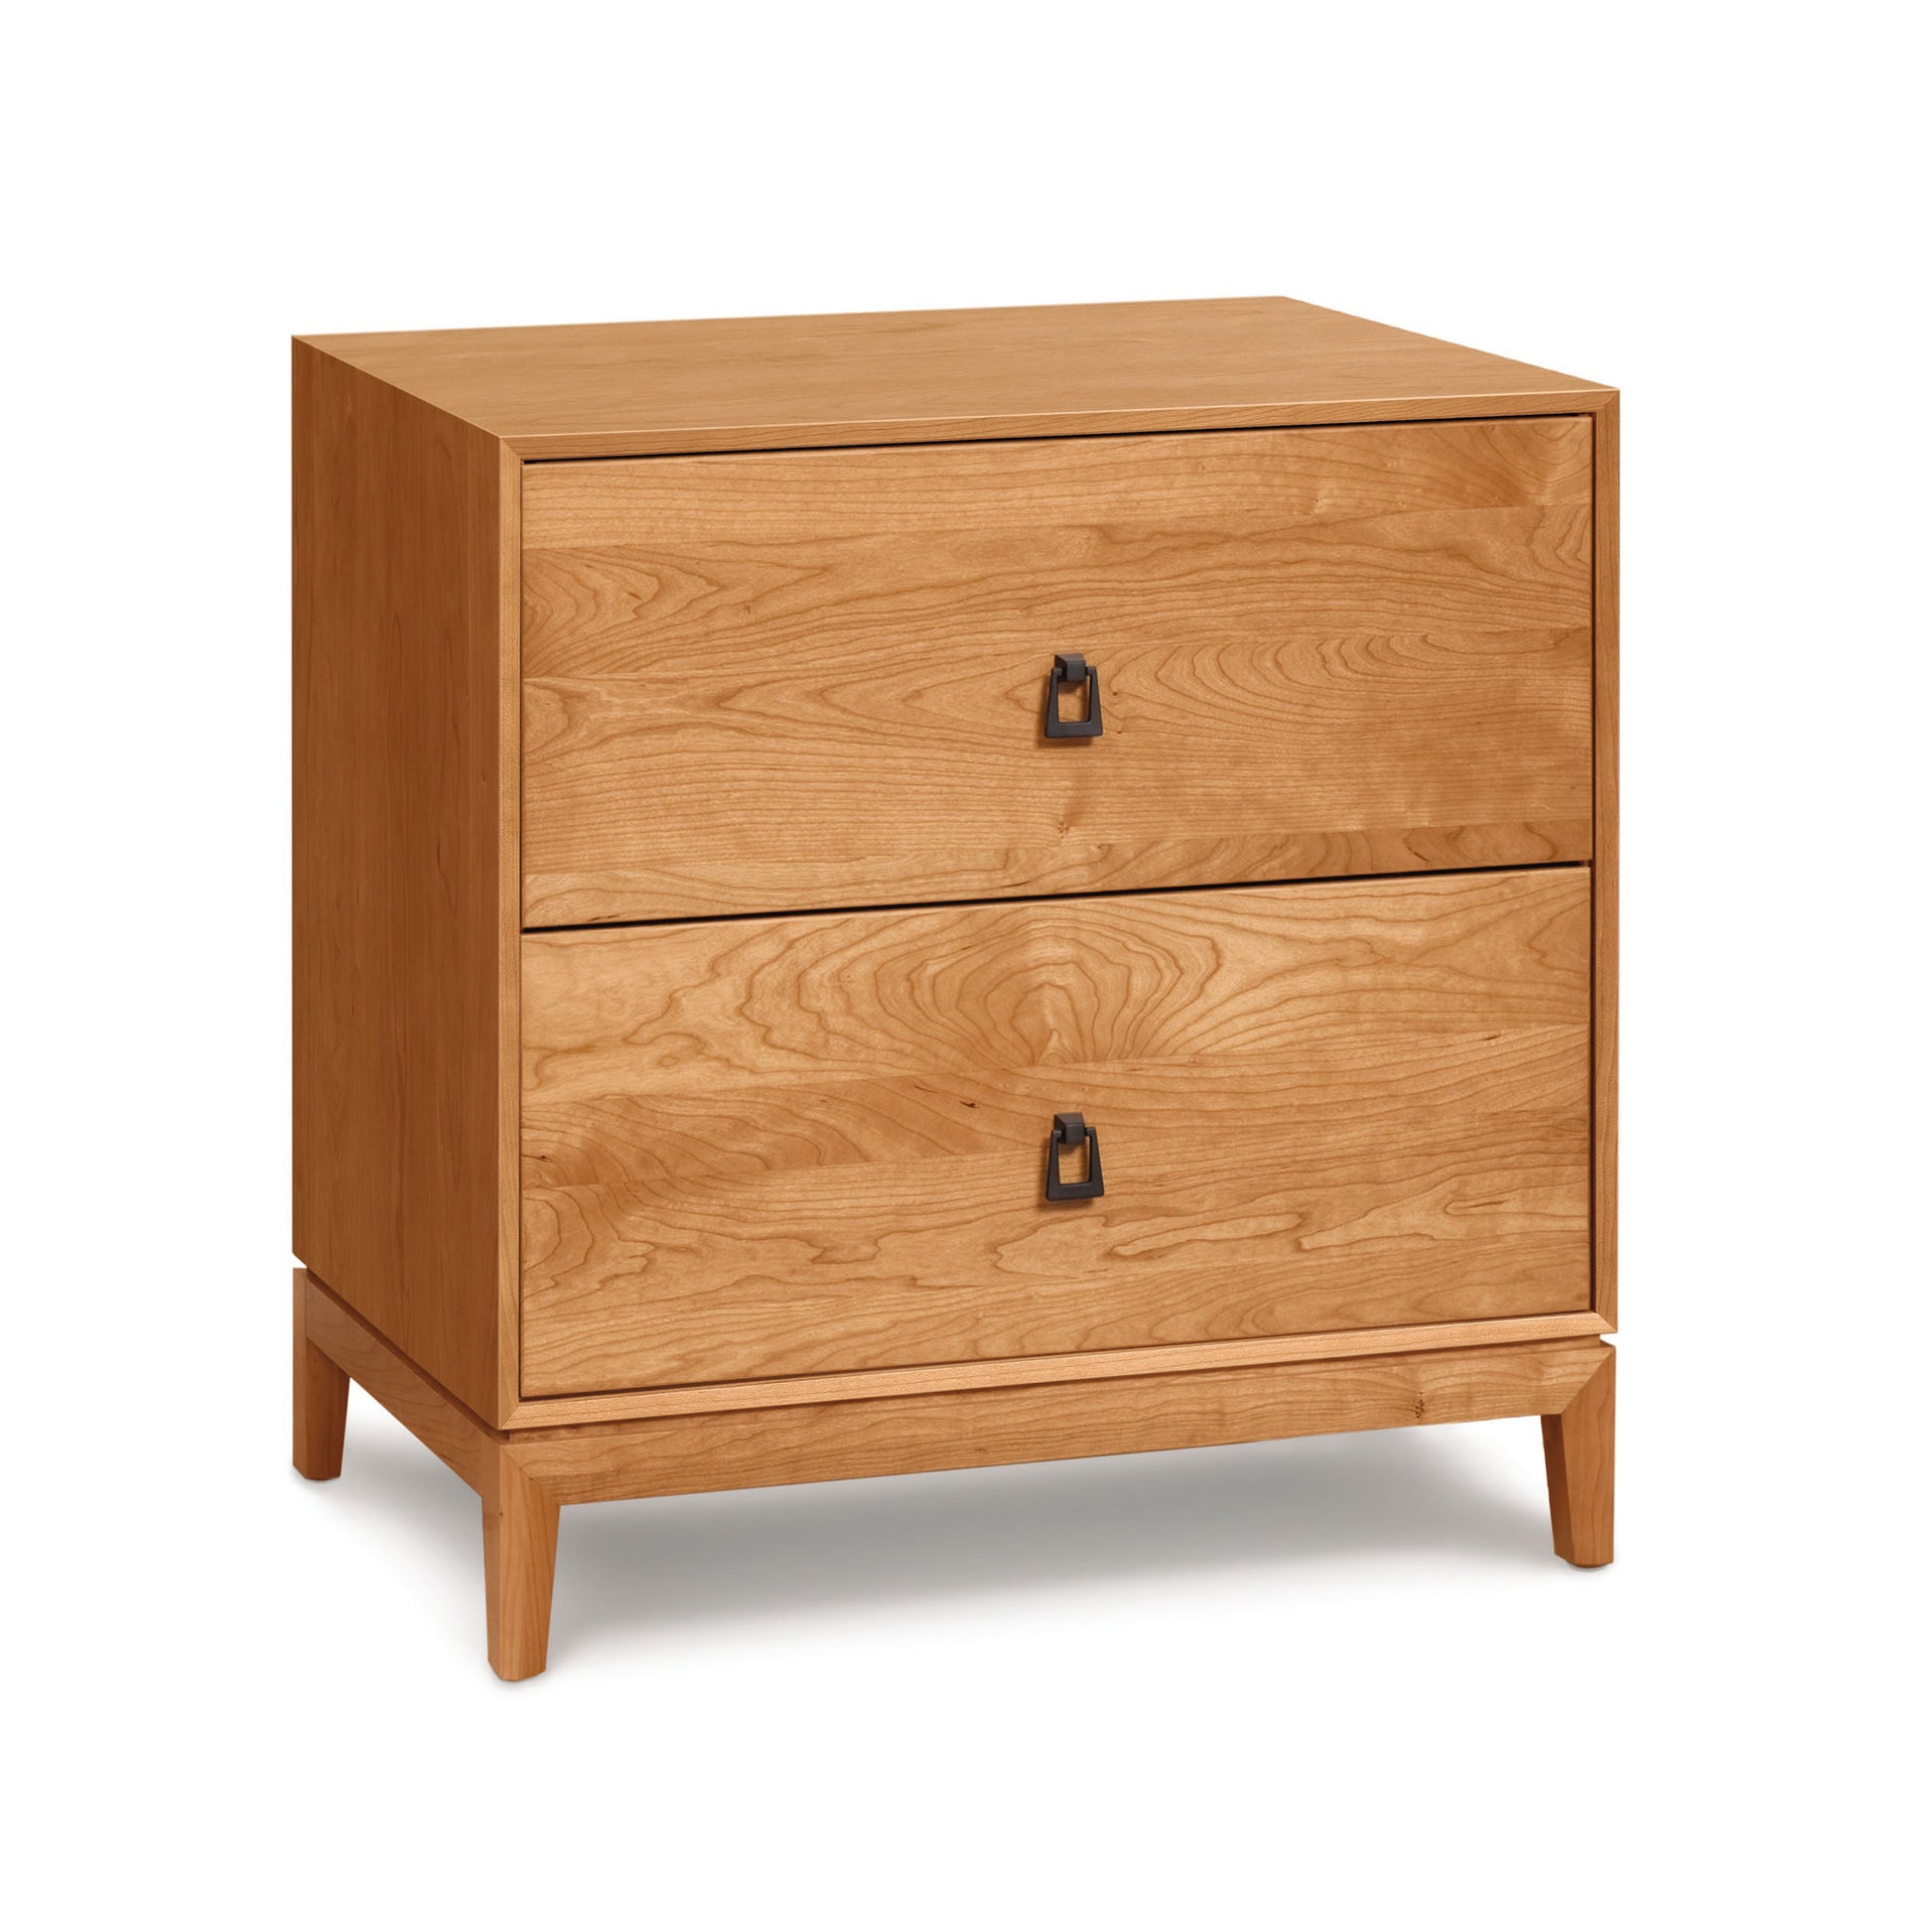 A Copeland Furniture Mansfield 2-Drawer Nightstand with metal handles on a white background, showcasing Craftsman design.